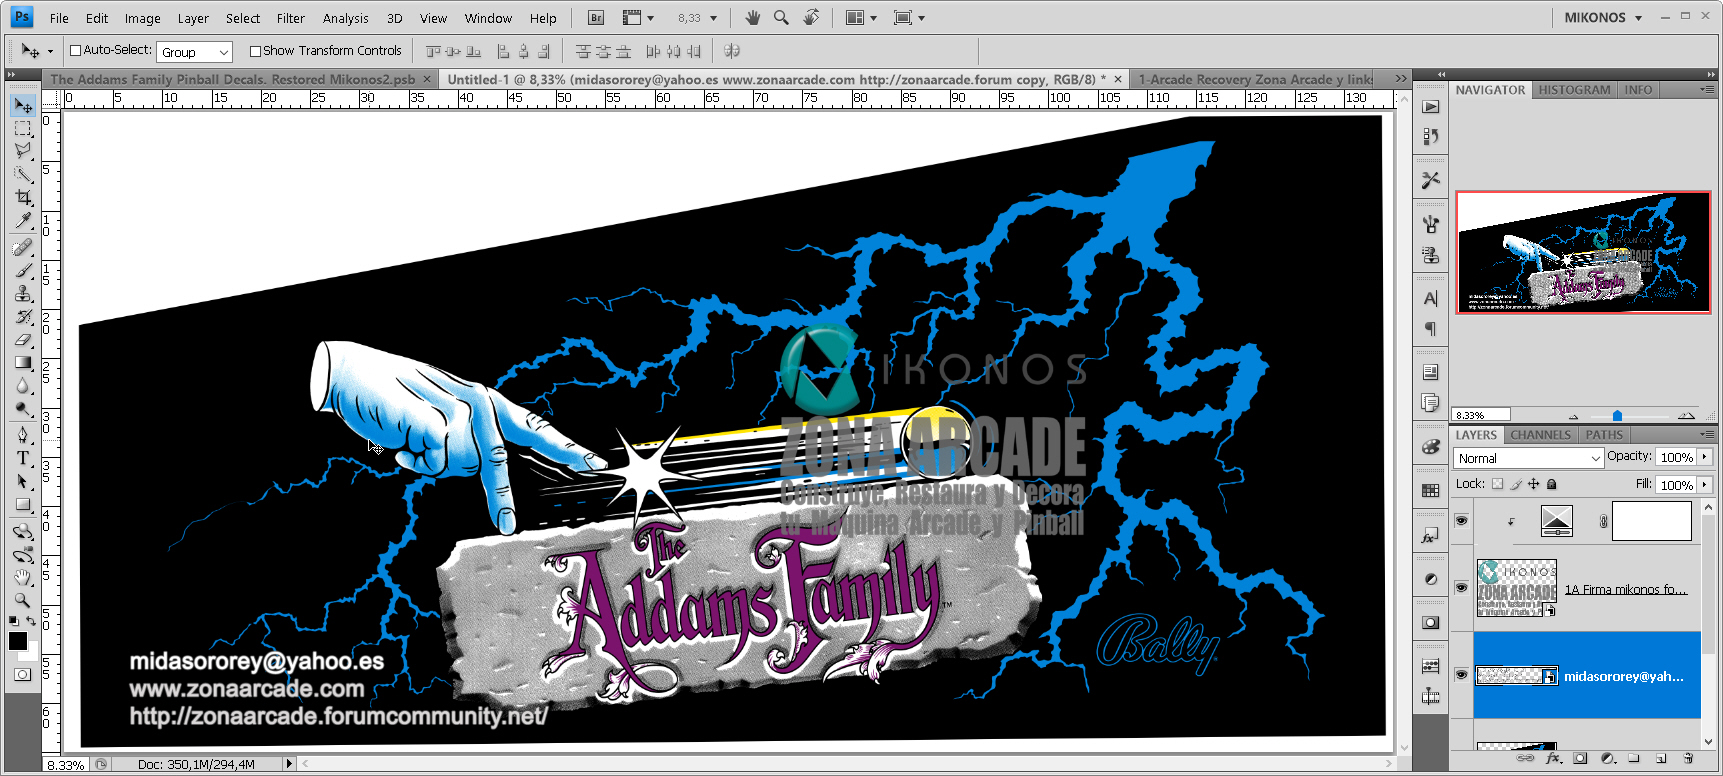 The Addams Family Left Side Art Pinball Decal. Restored Mikonos1